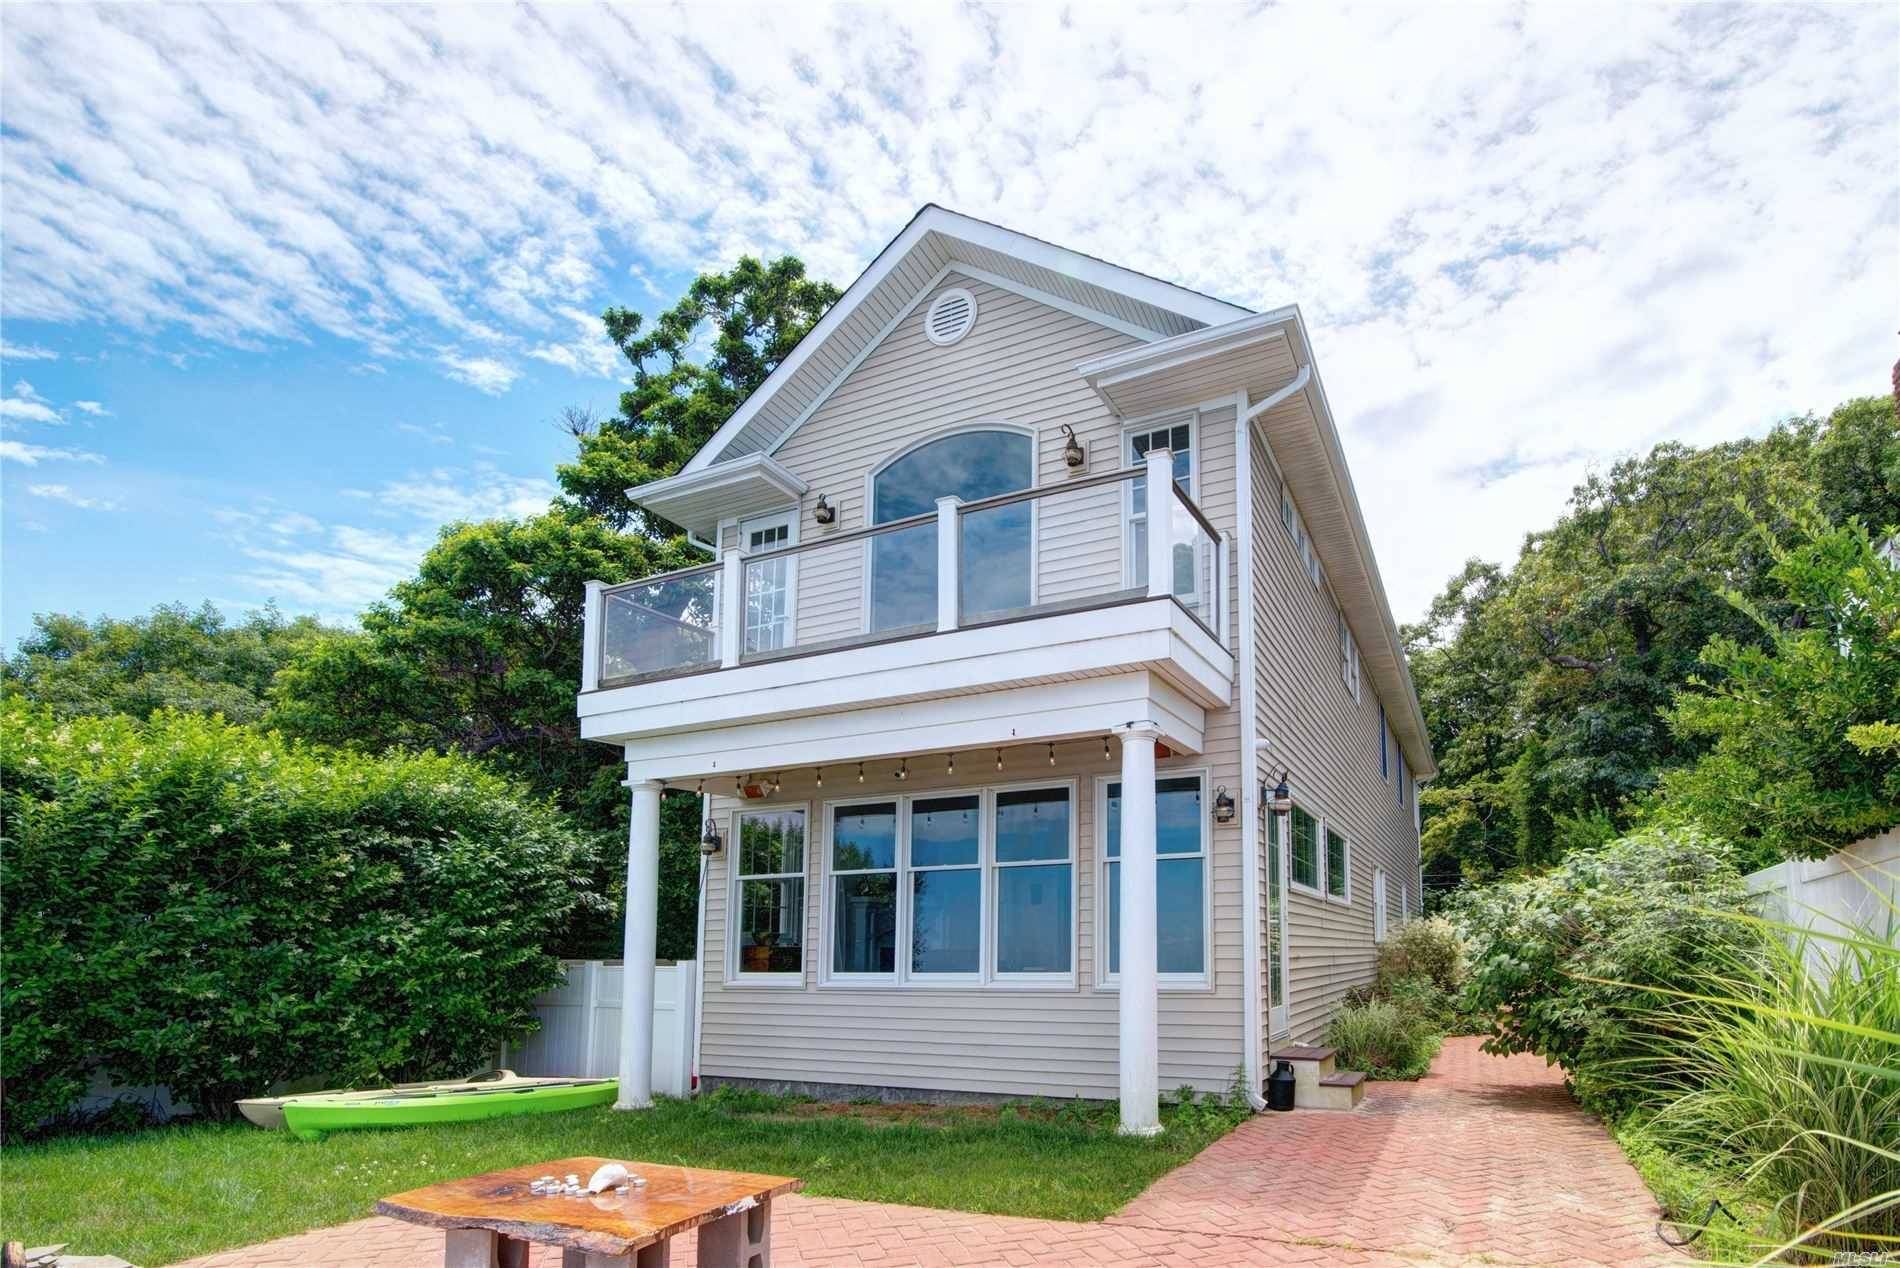 Diamond Custom Built Home With Breathtaking Waterviews Overlooking Long Island Sound, Completely Rebuilt in 2012.